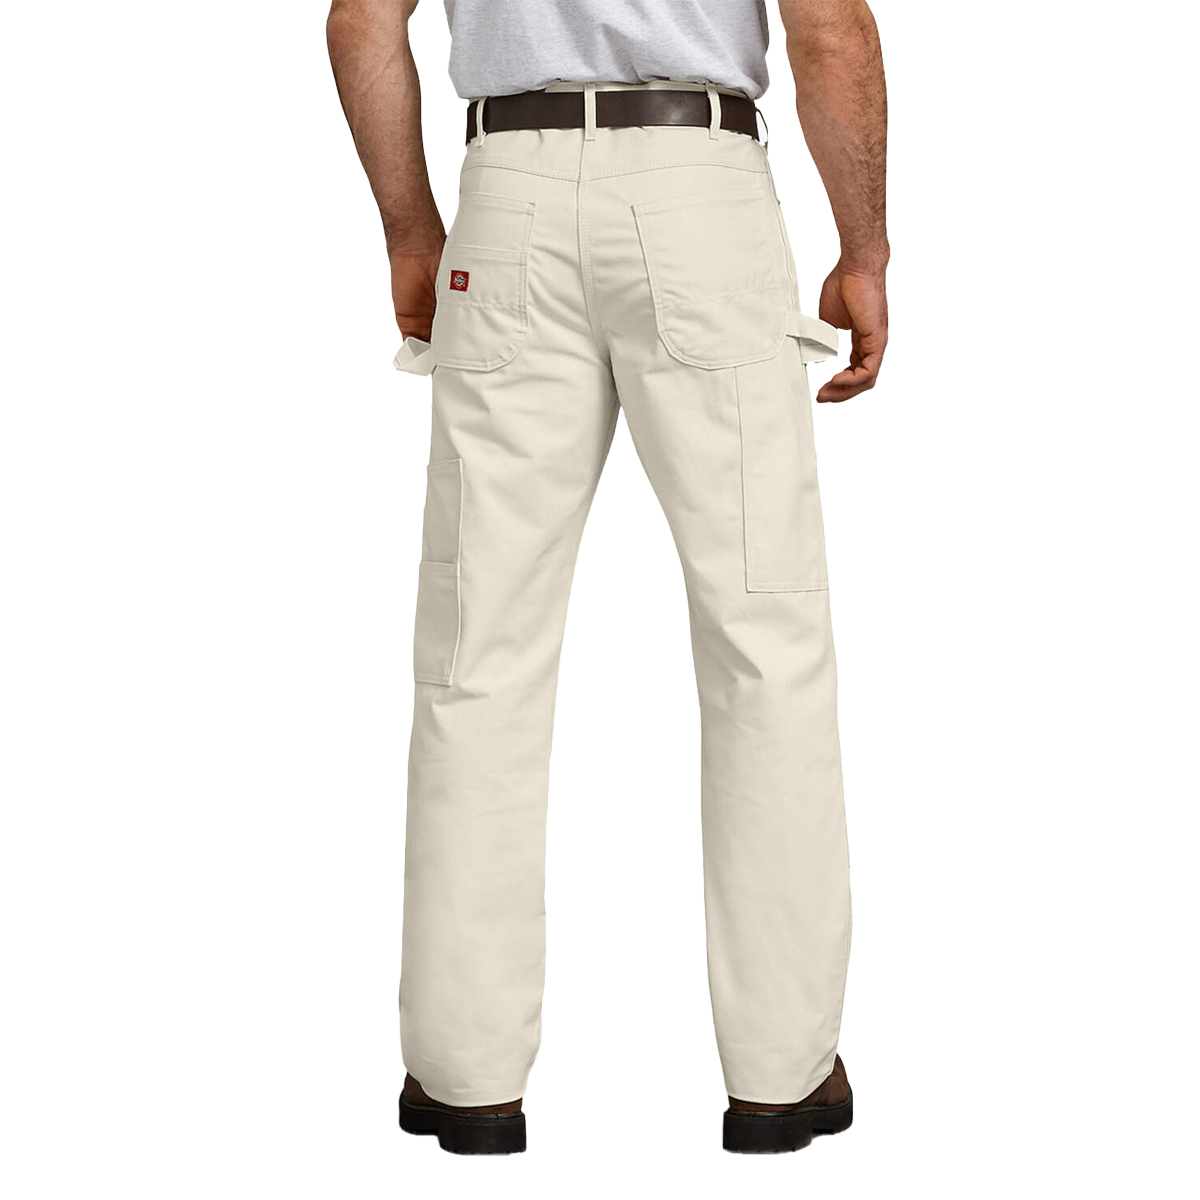 Dickies Relaxed Fit Double Knee Carpenter Painters Pants - Natural Beige